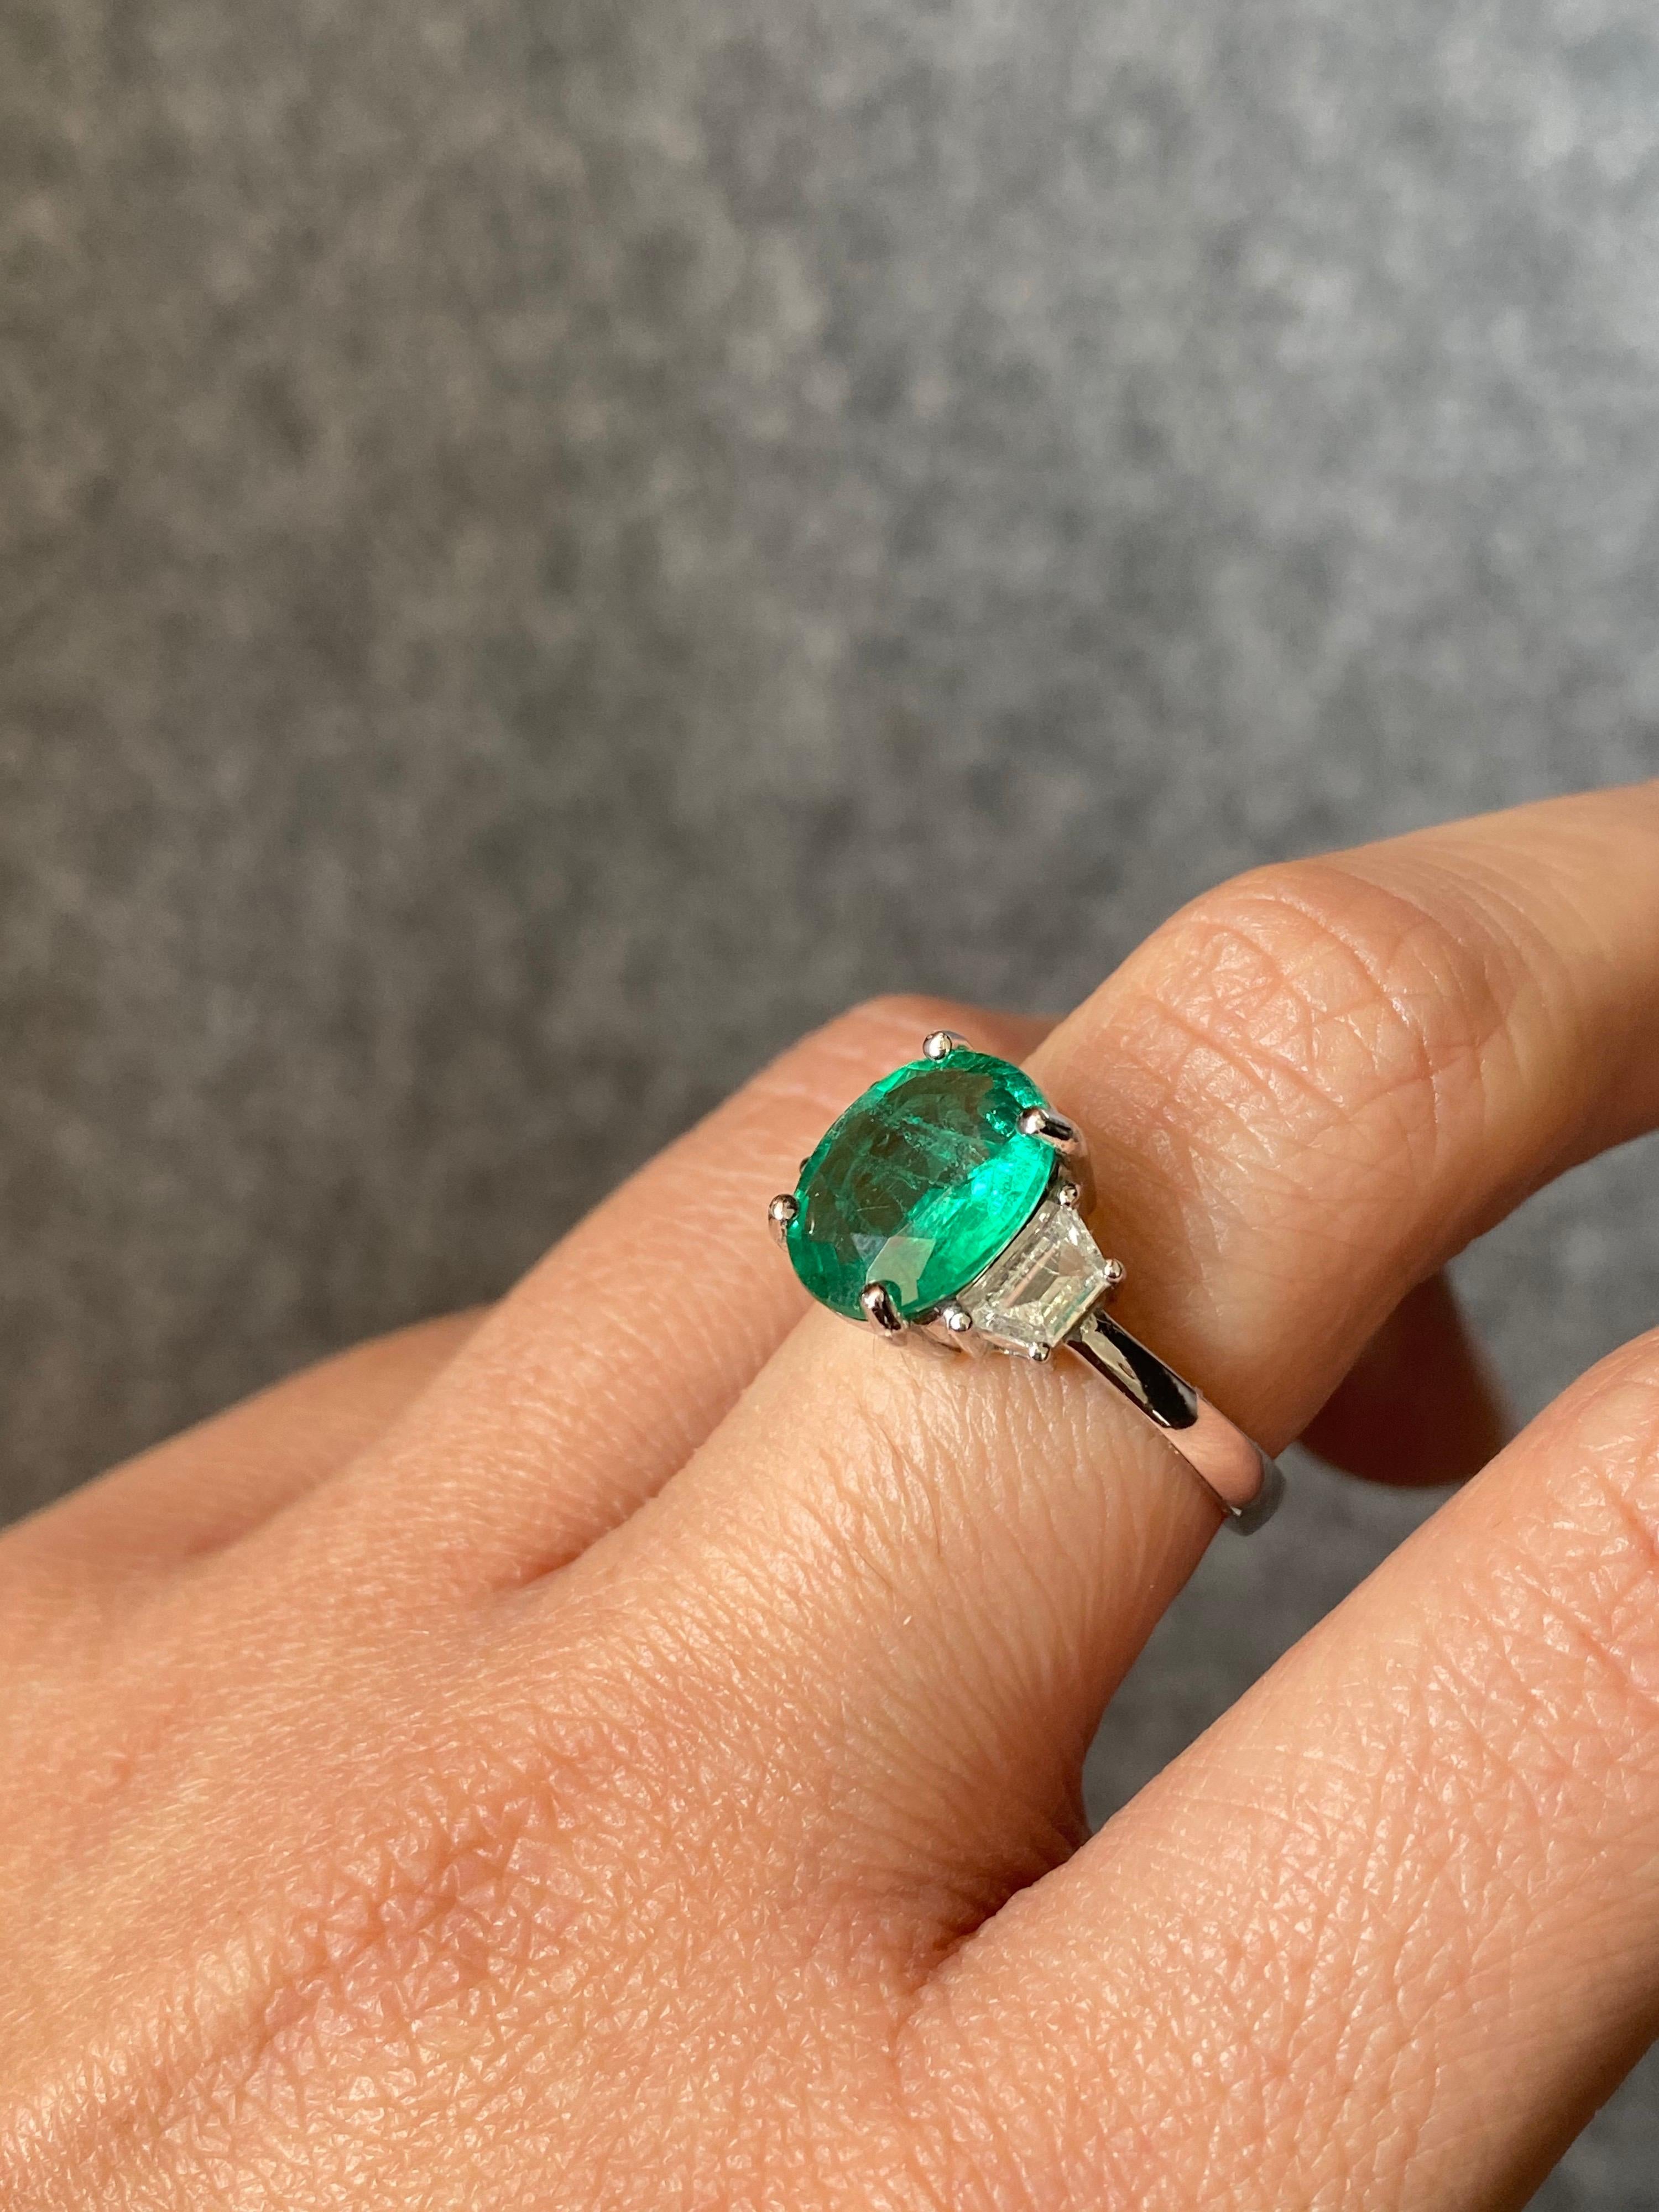 A beautiful oval-shape Zambian Emerald stone, weighing 2.56 carats - transparent with very few inclusions. It's a vivid green Emerald, which is an ideal color for the stone. The 2 trapezoid Diamonds are colorless, VS quality and weigh 0.44 carats in